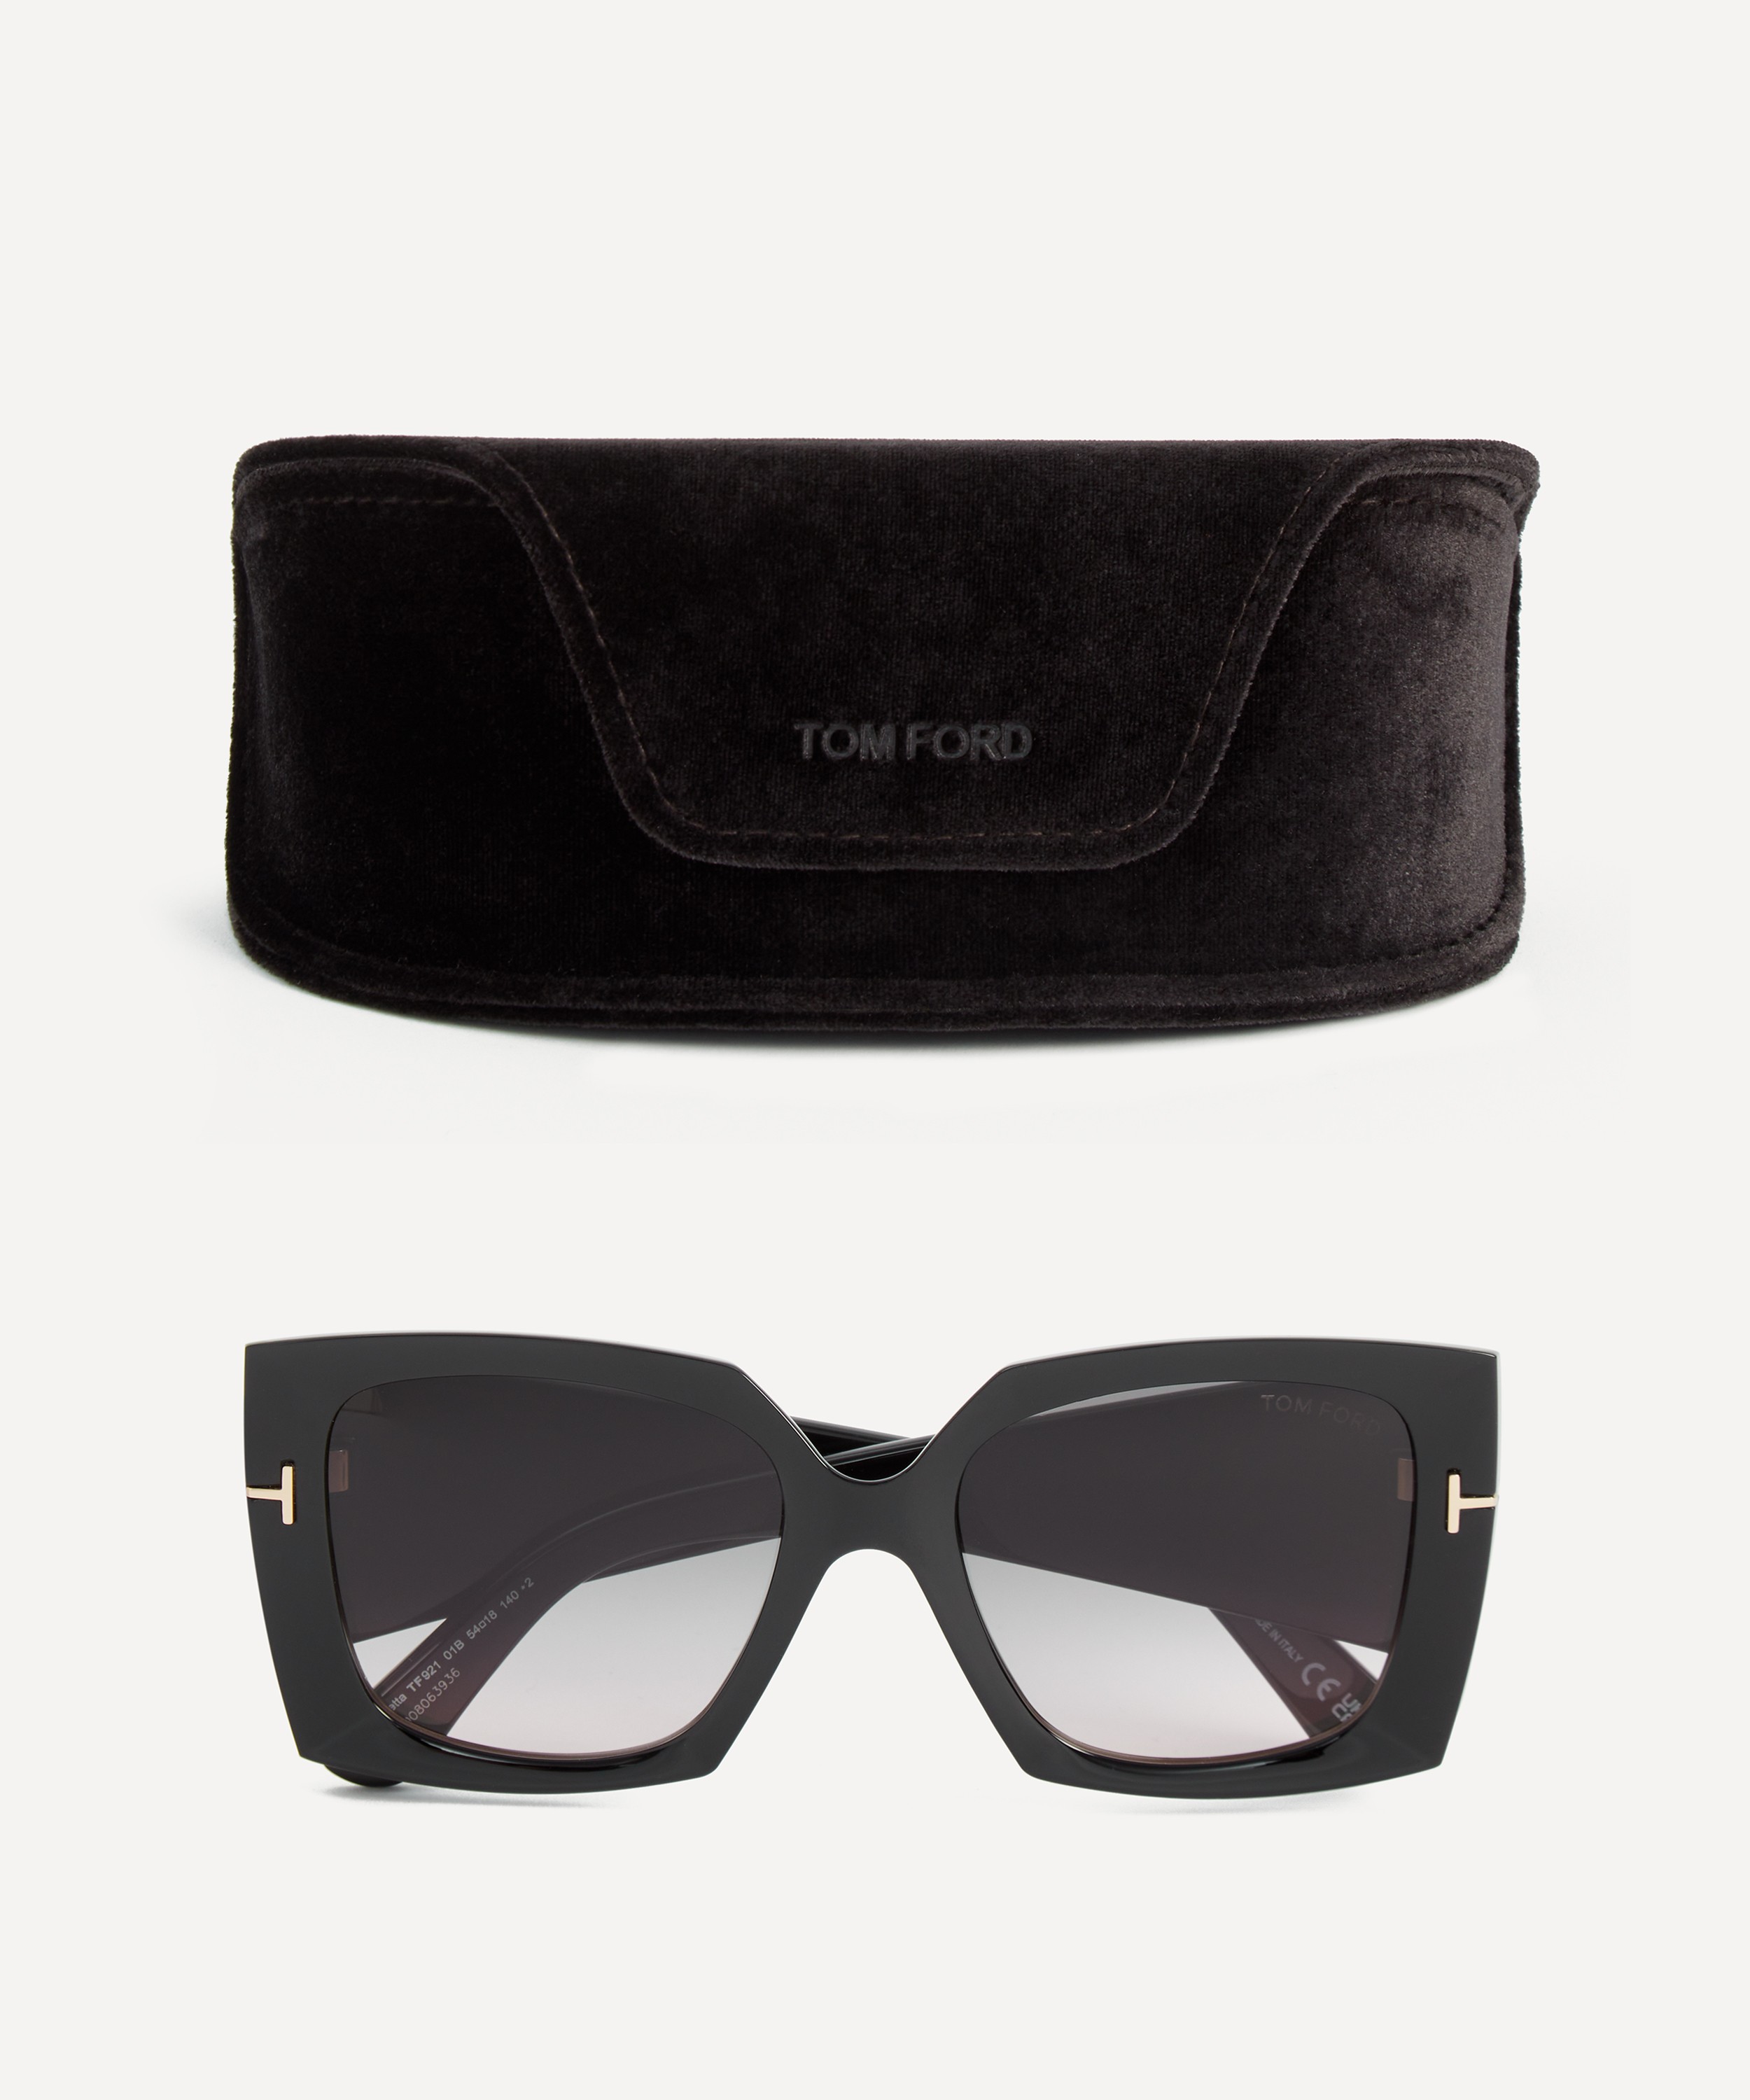 Tom Ford - Jaquetta Oversized Square Sunglasses image number 3